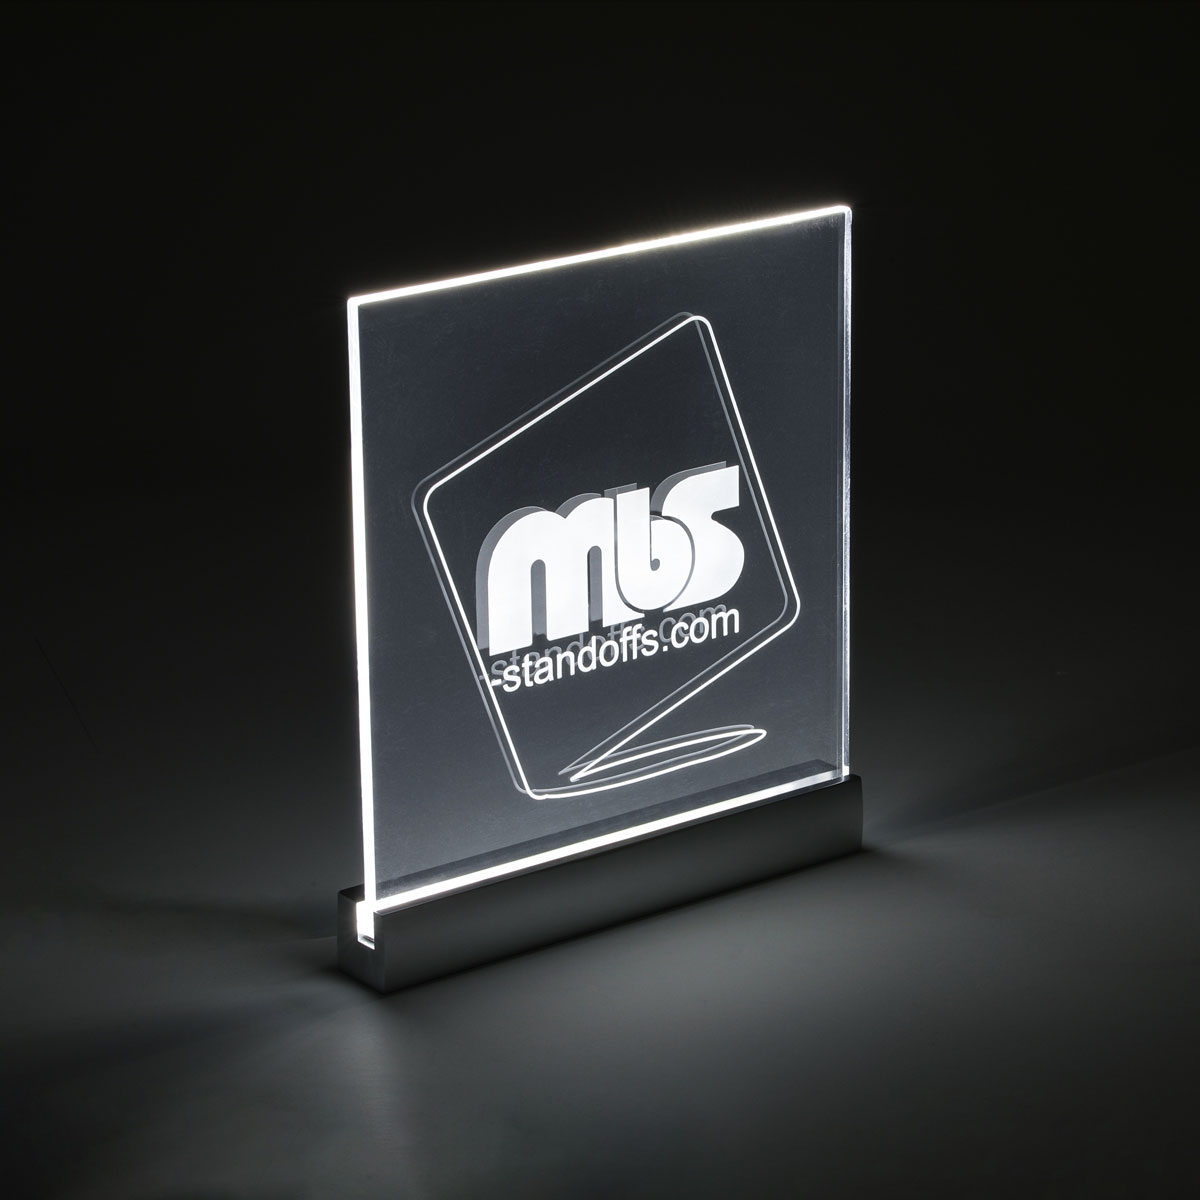 WHITE LED Sign Clamp in 14 15/16'' (380 mm) length X 1'' (25.4 mm) Silver satin aluminum finish.Mount Kit Supports Signs Up To 5/16'' Thick, Wall Mount, Low Voltage transformer included.